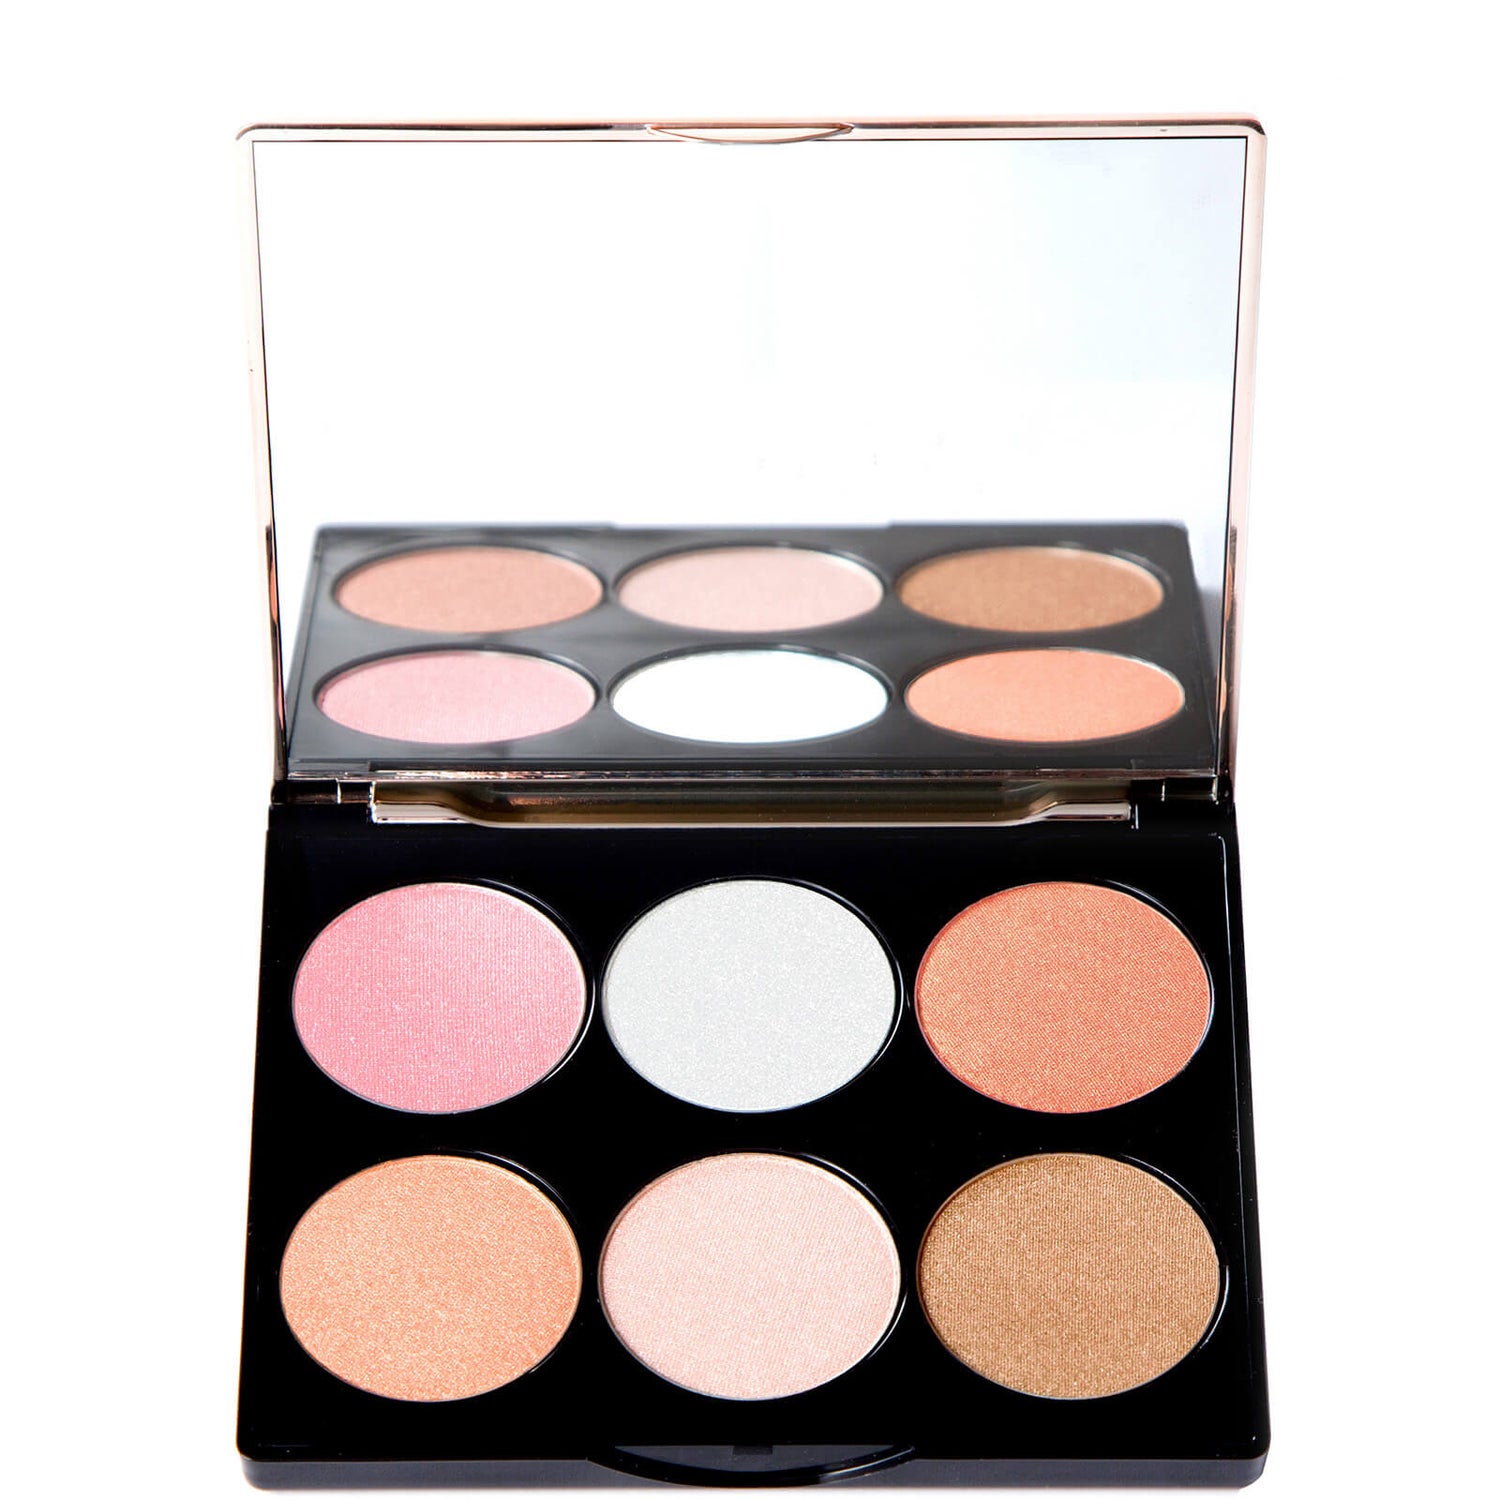 Cover FX Perfect Highlighting Palette